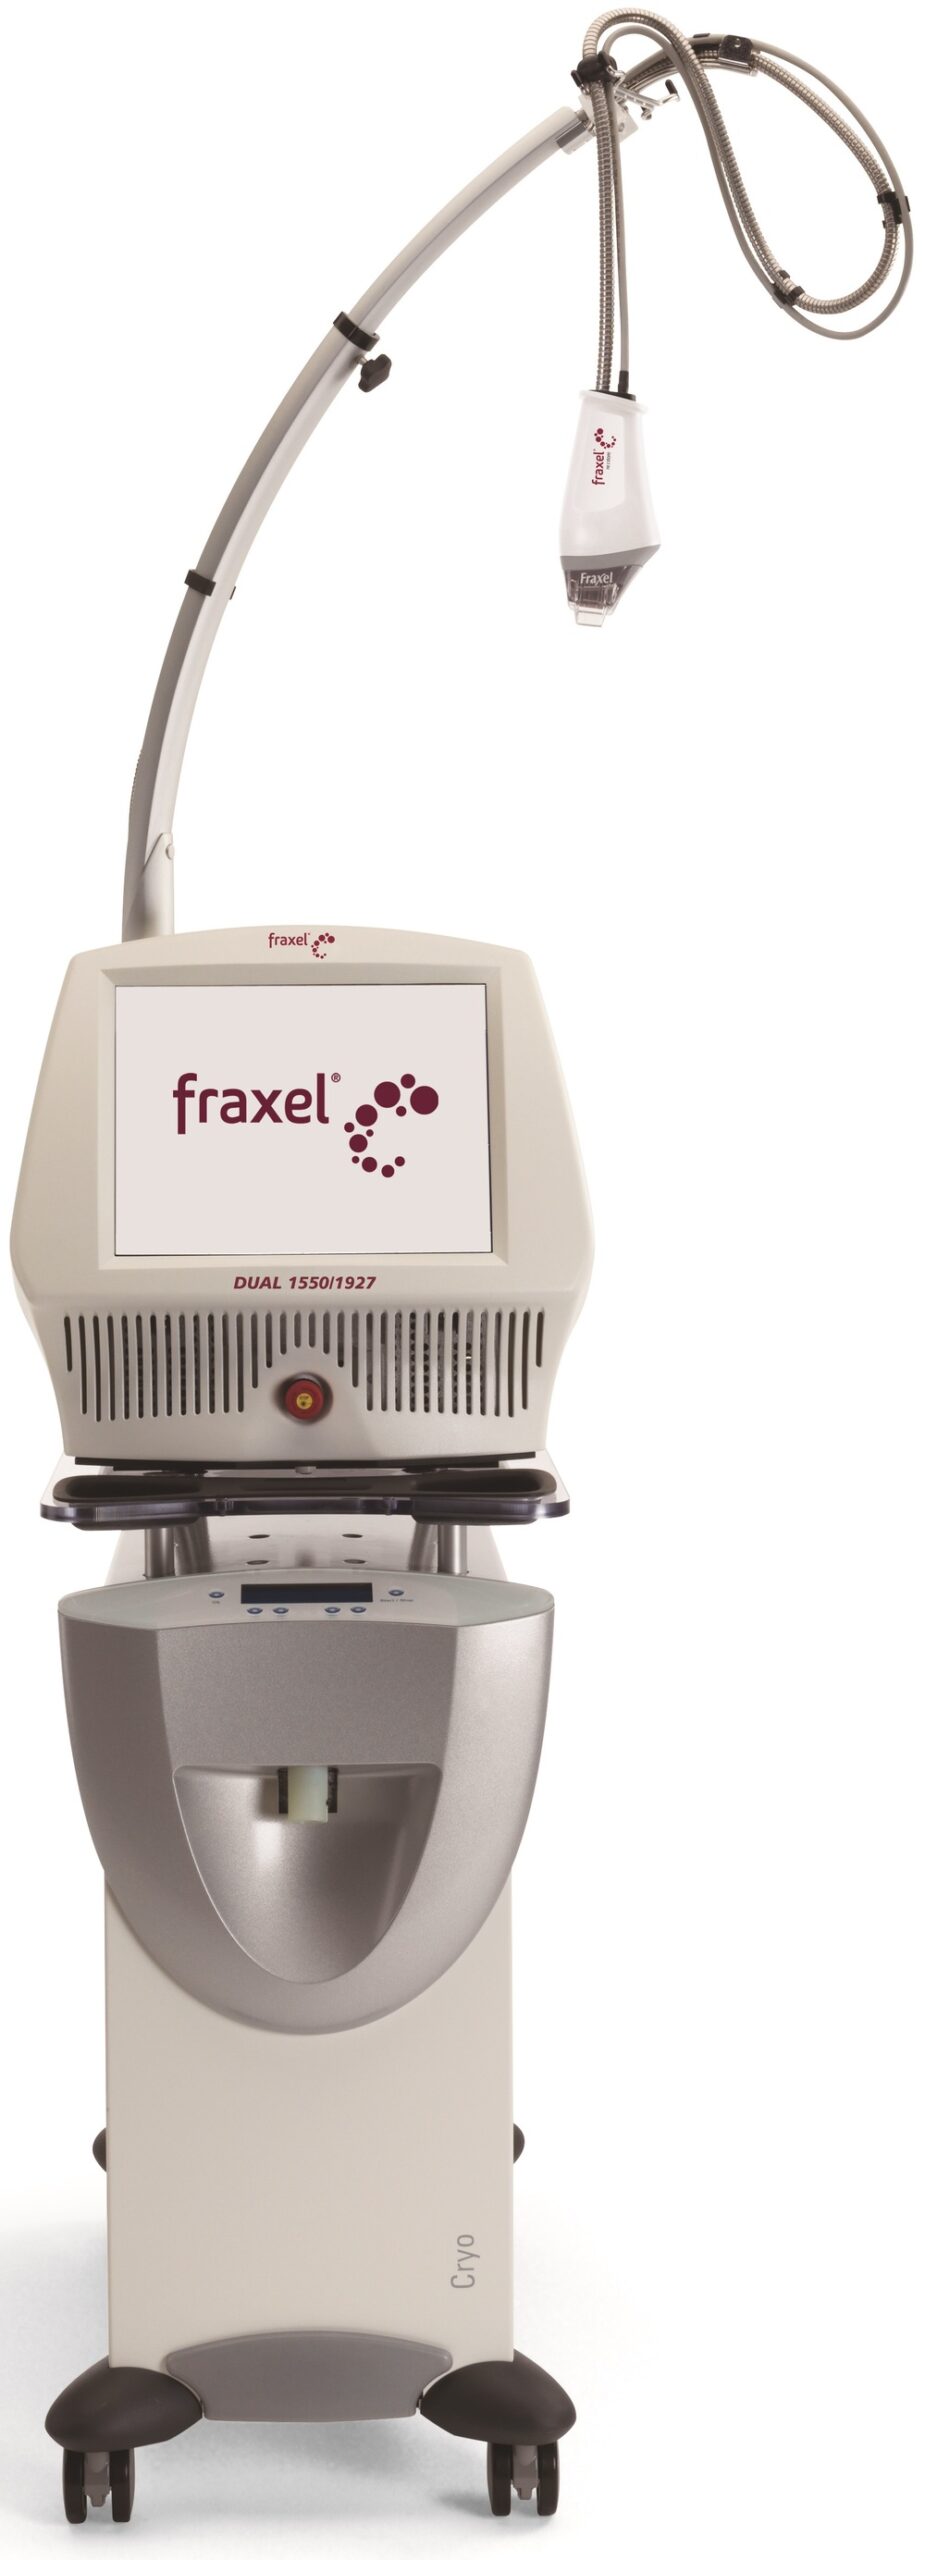 fraxel dual laser device